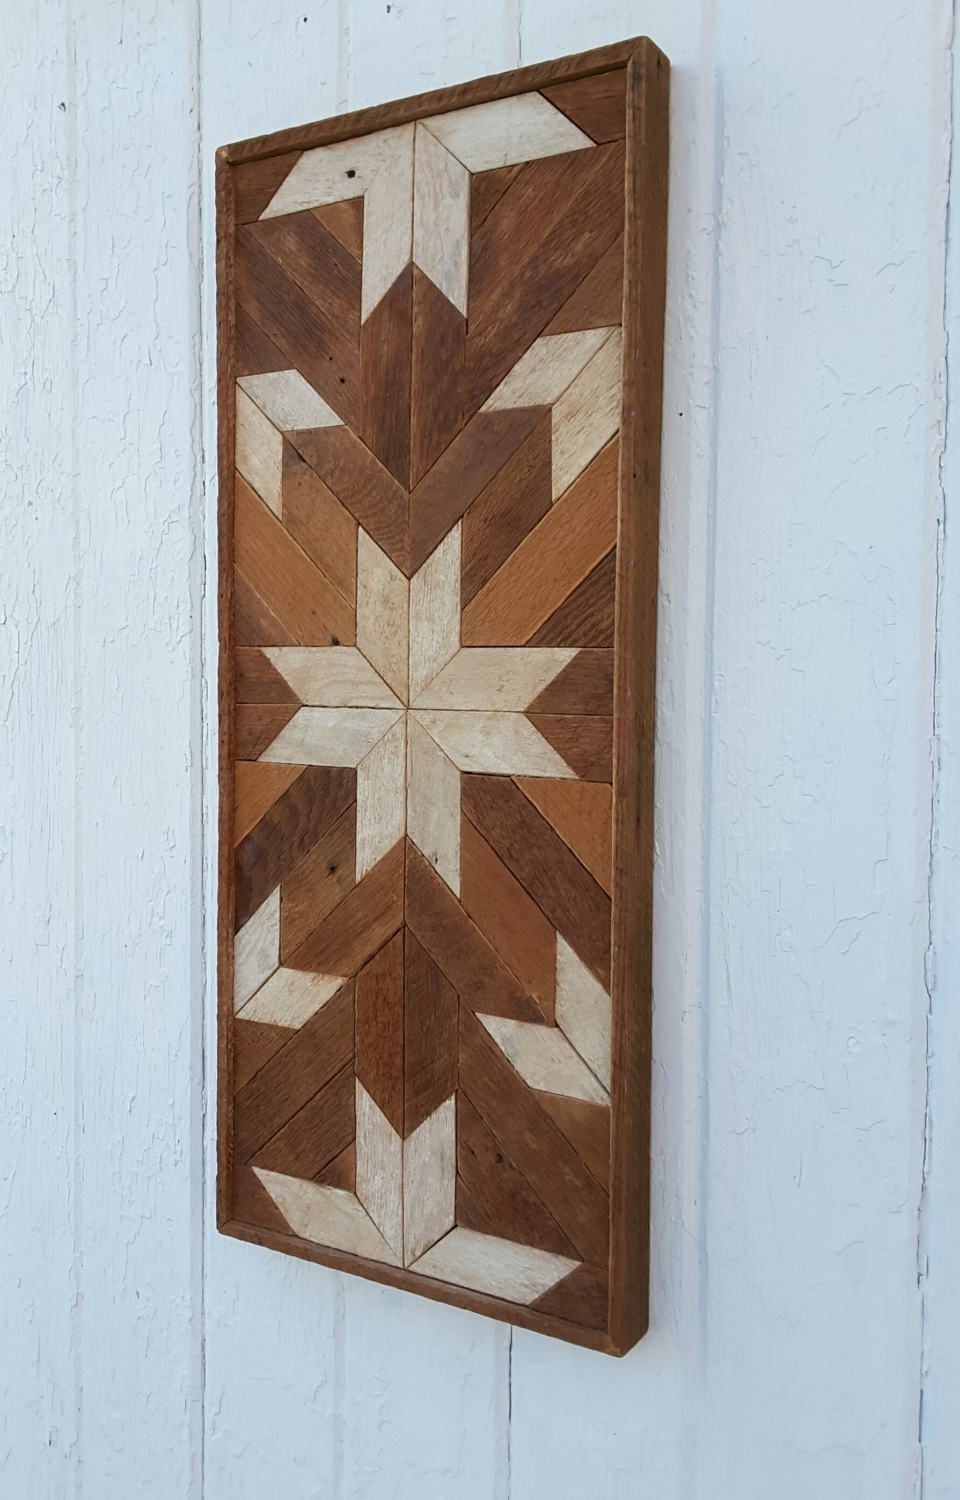 Natural Wood Wall Art For Most Current Reclaimed Wood Wall Art, Decor, Lath Art, Geometric, Mosaic (View 10 of 15)